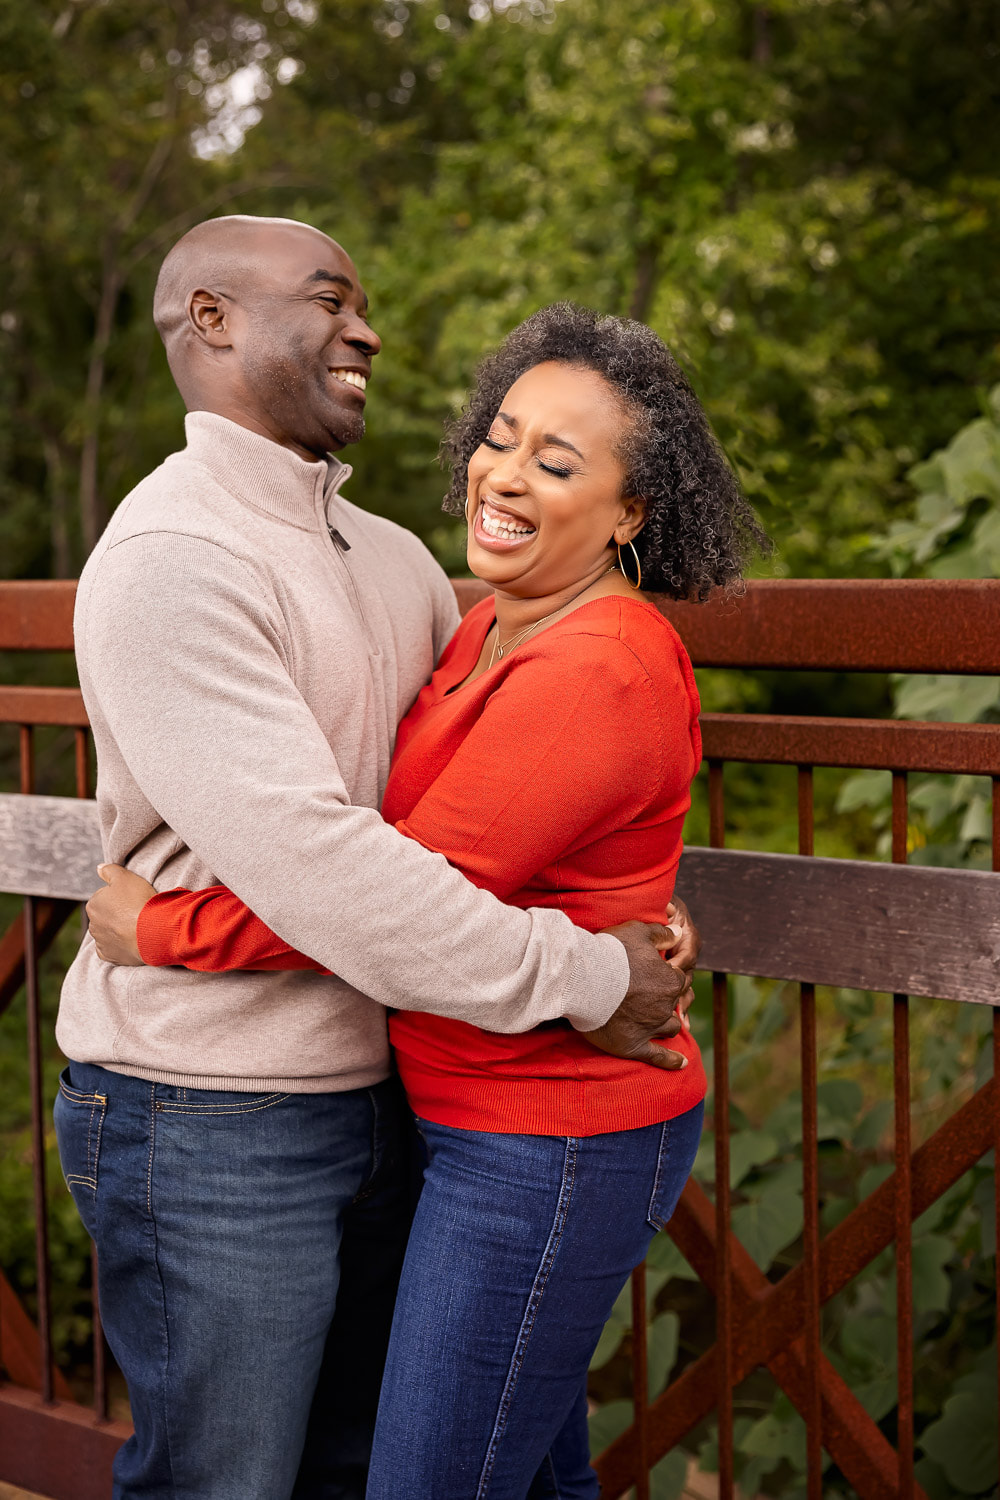 Loving couple portrait at Occoquan Park in Fairfax County VA photographed by Tamieka Smith Photography